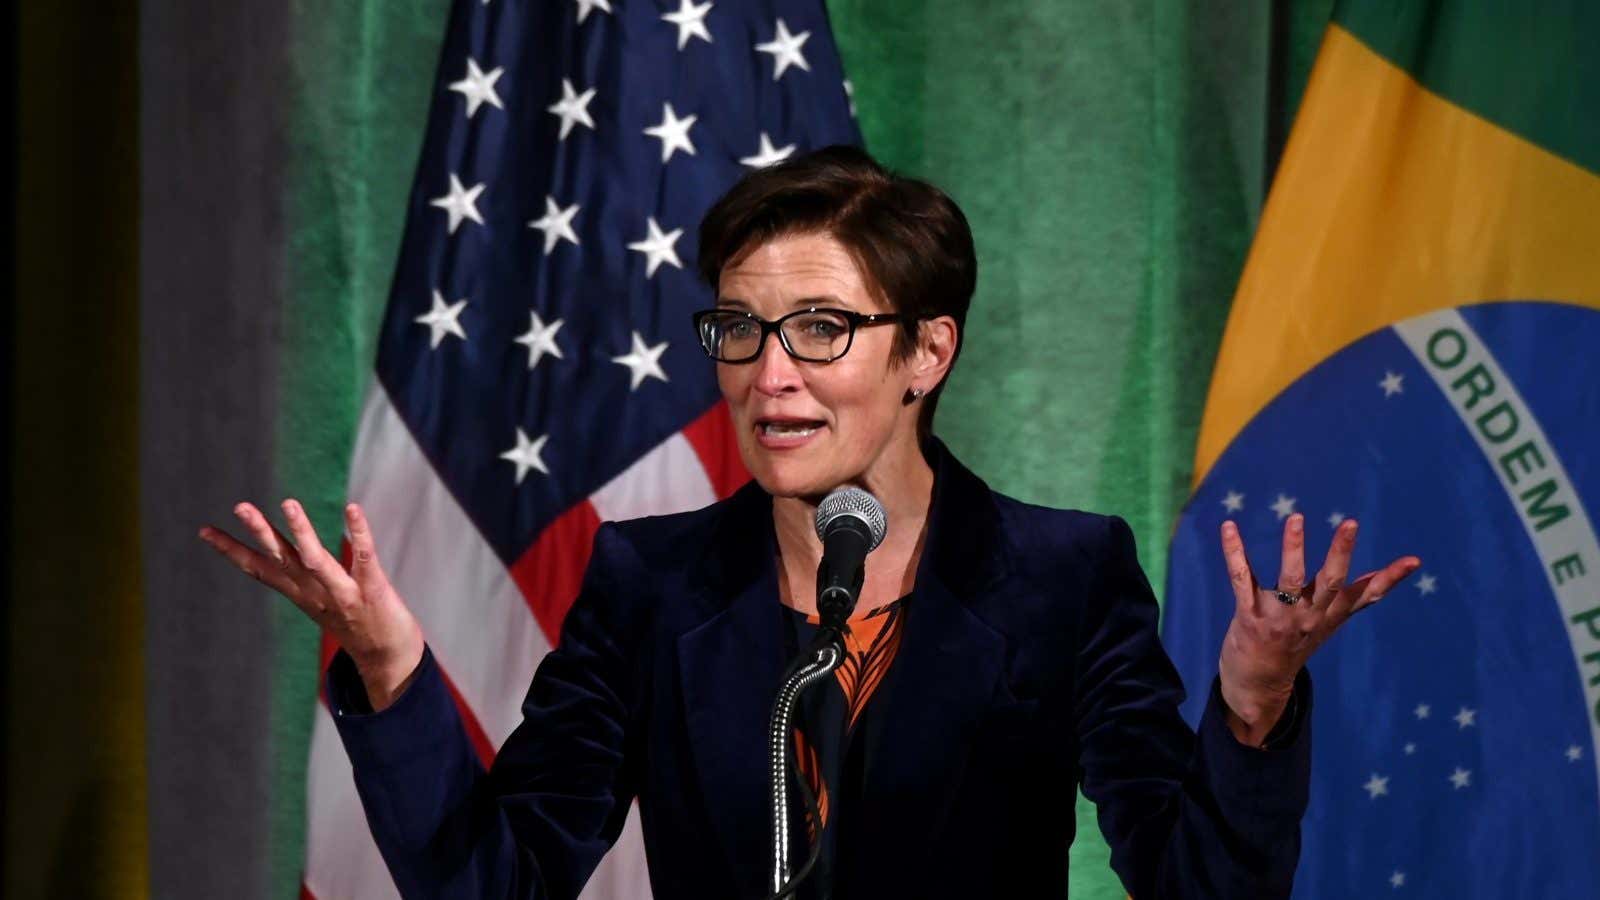 Citigroup executive Jane Fraser, who was named the company’s next CEO on Thursday, addresses a Brazil-U.S. Business Council forum in Washington, U.S. March 18, 2019.